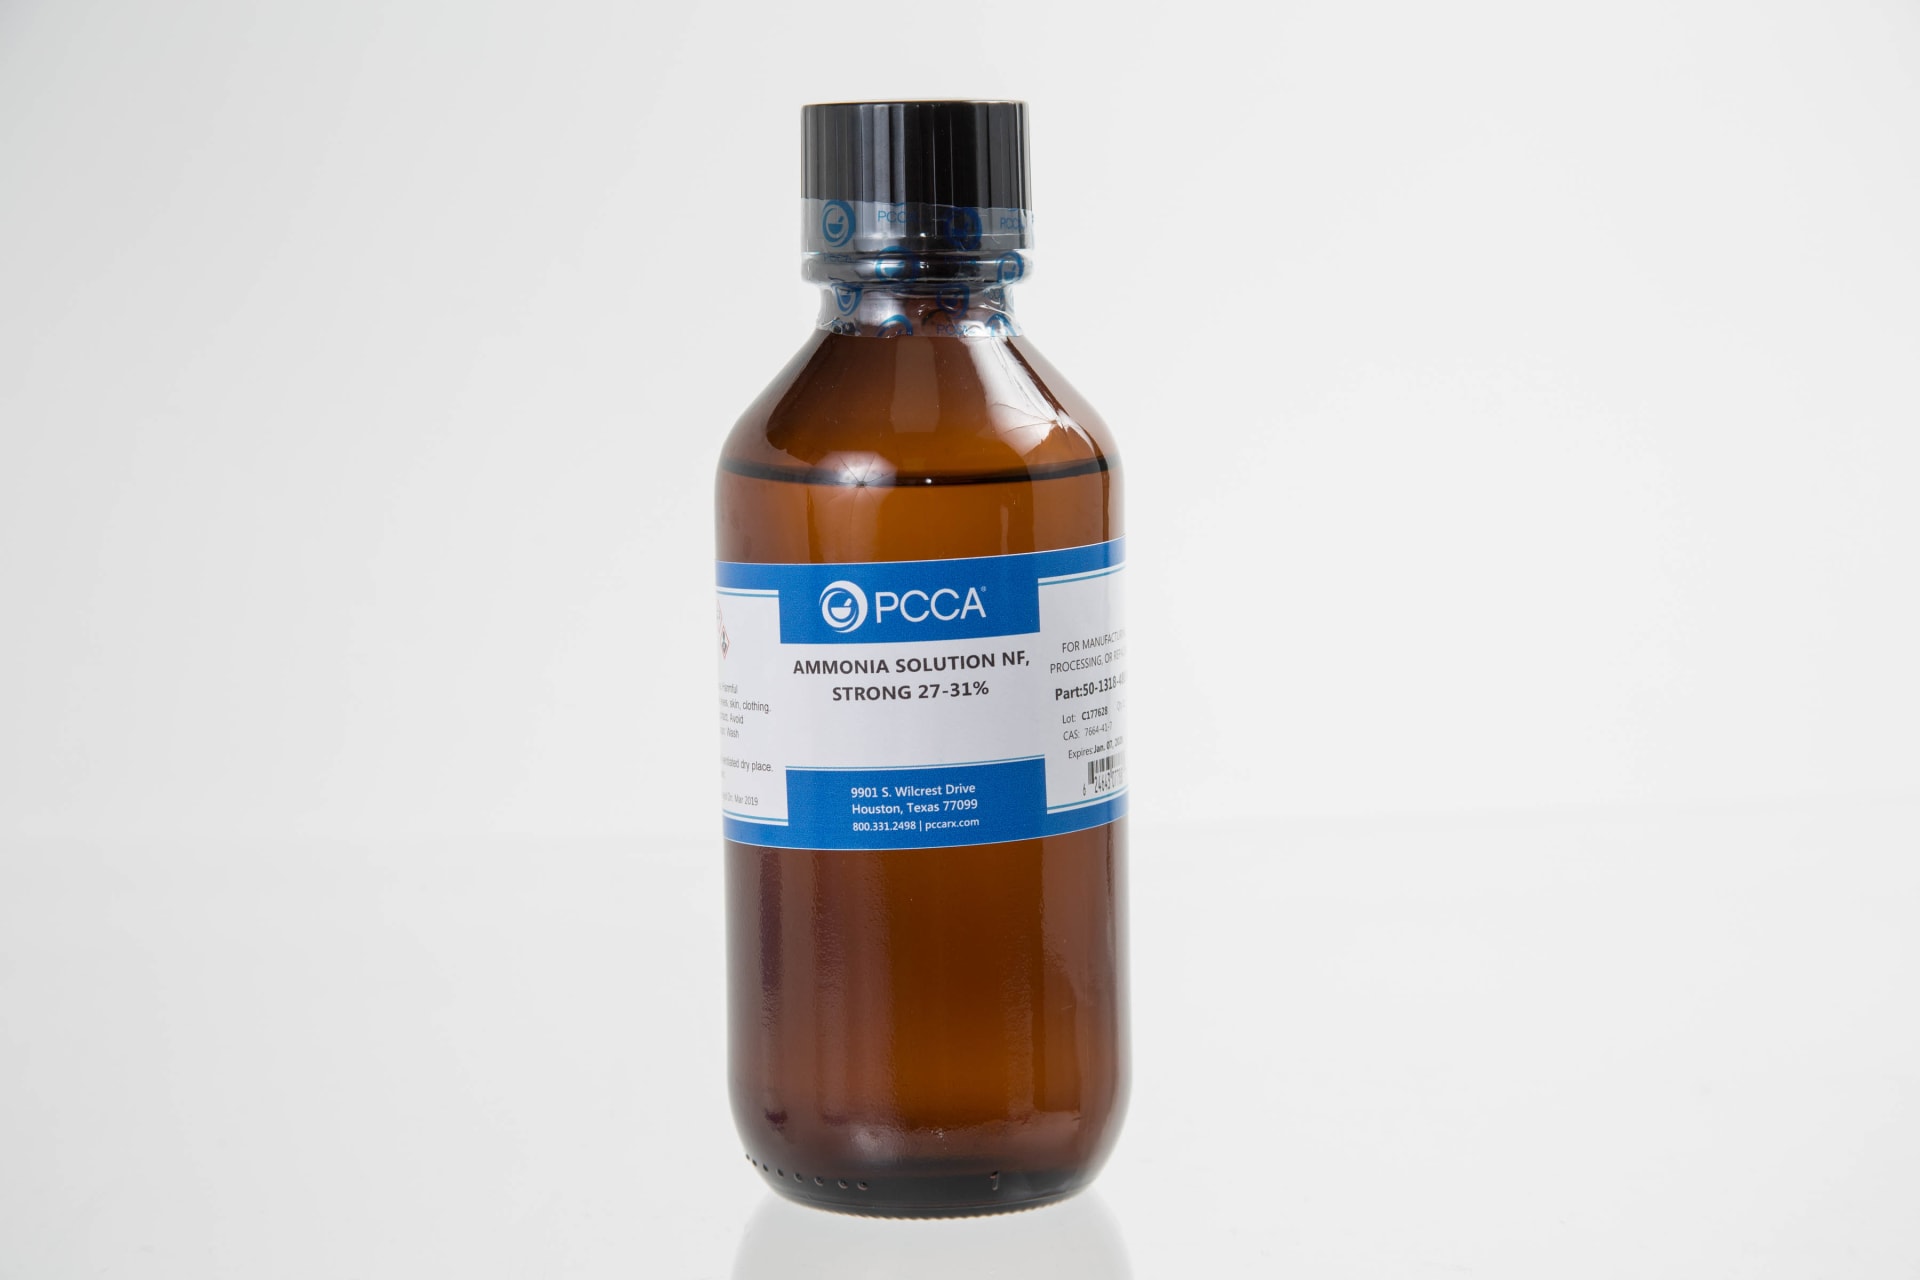 AMMONIA SOLUTION NF, STRONG 27-31% - PCCA